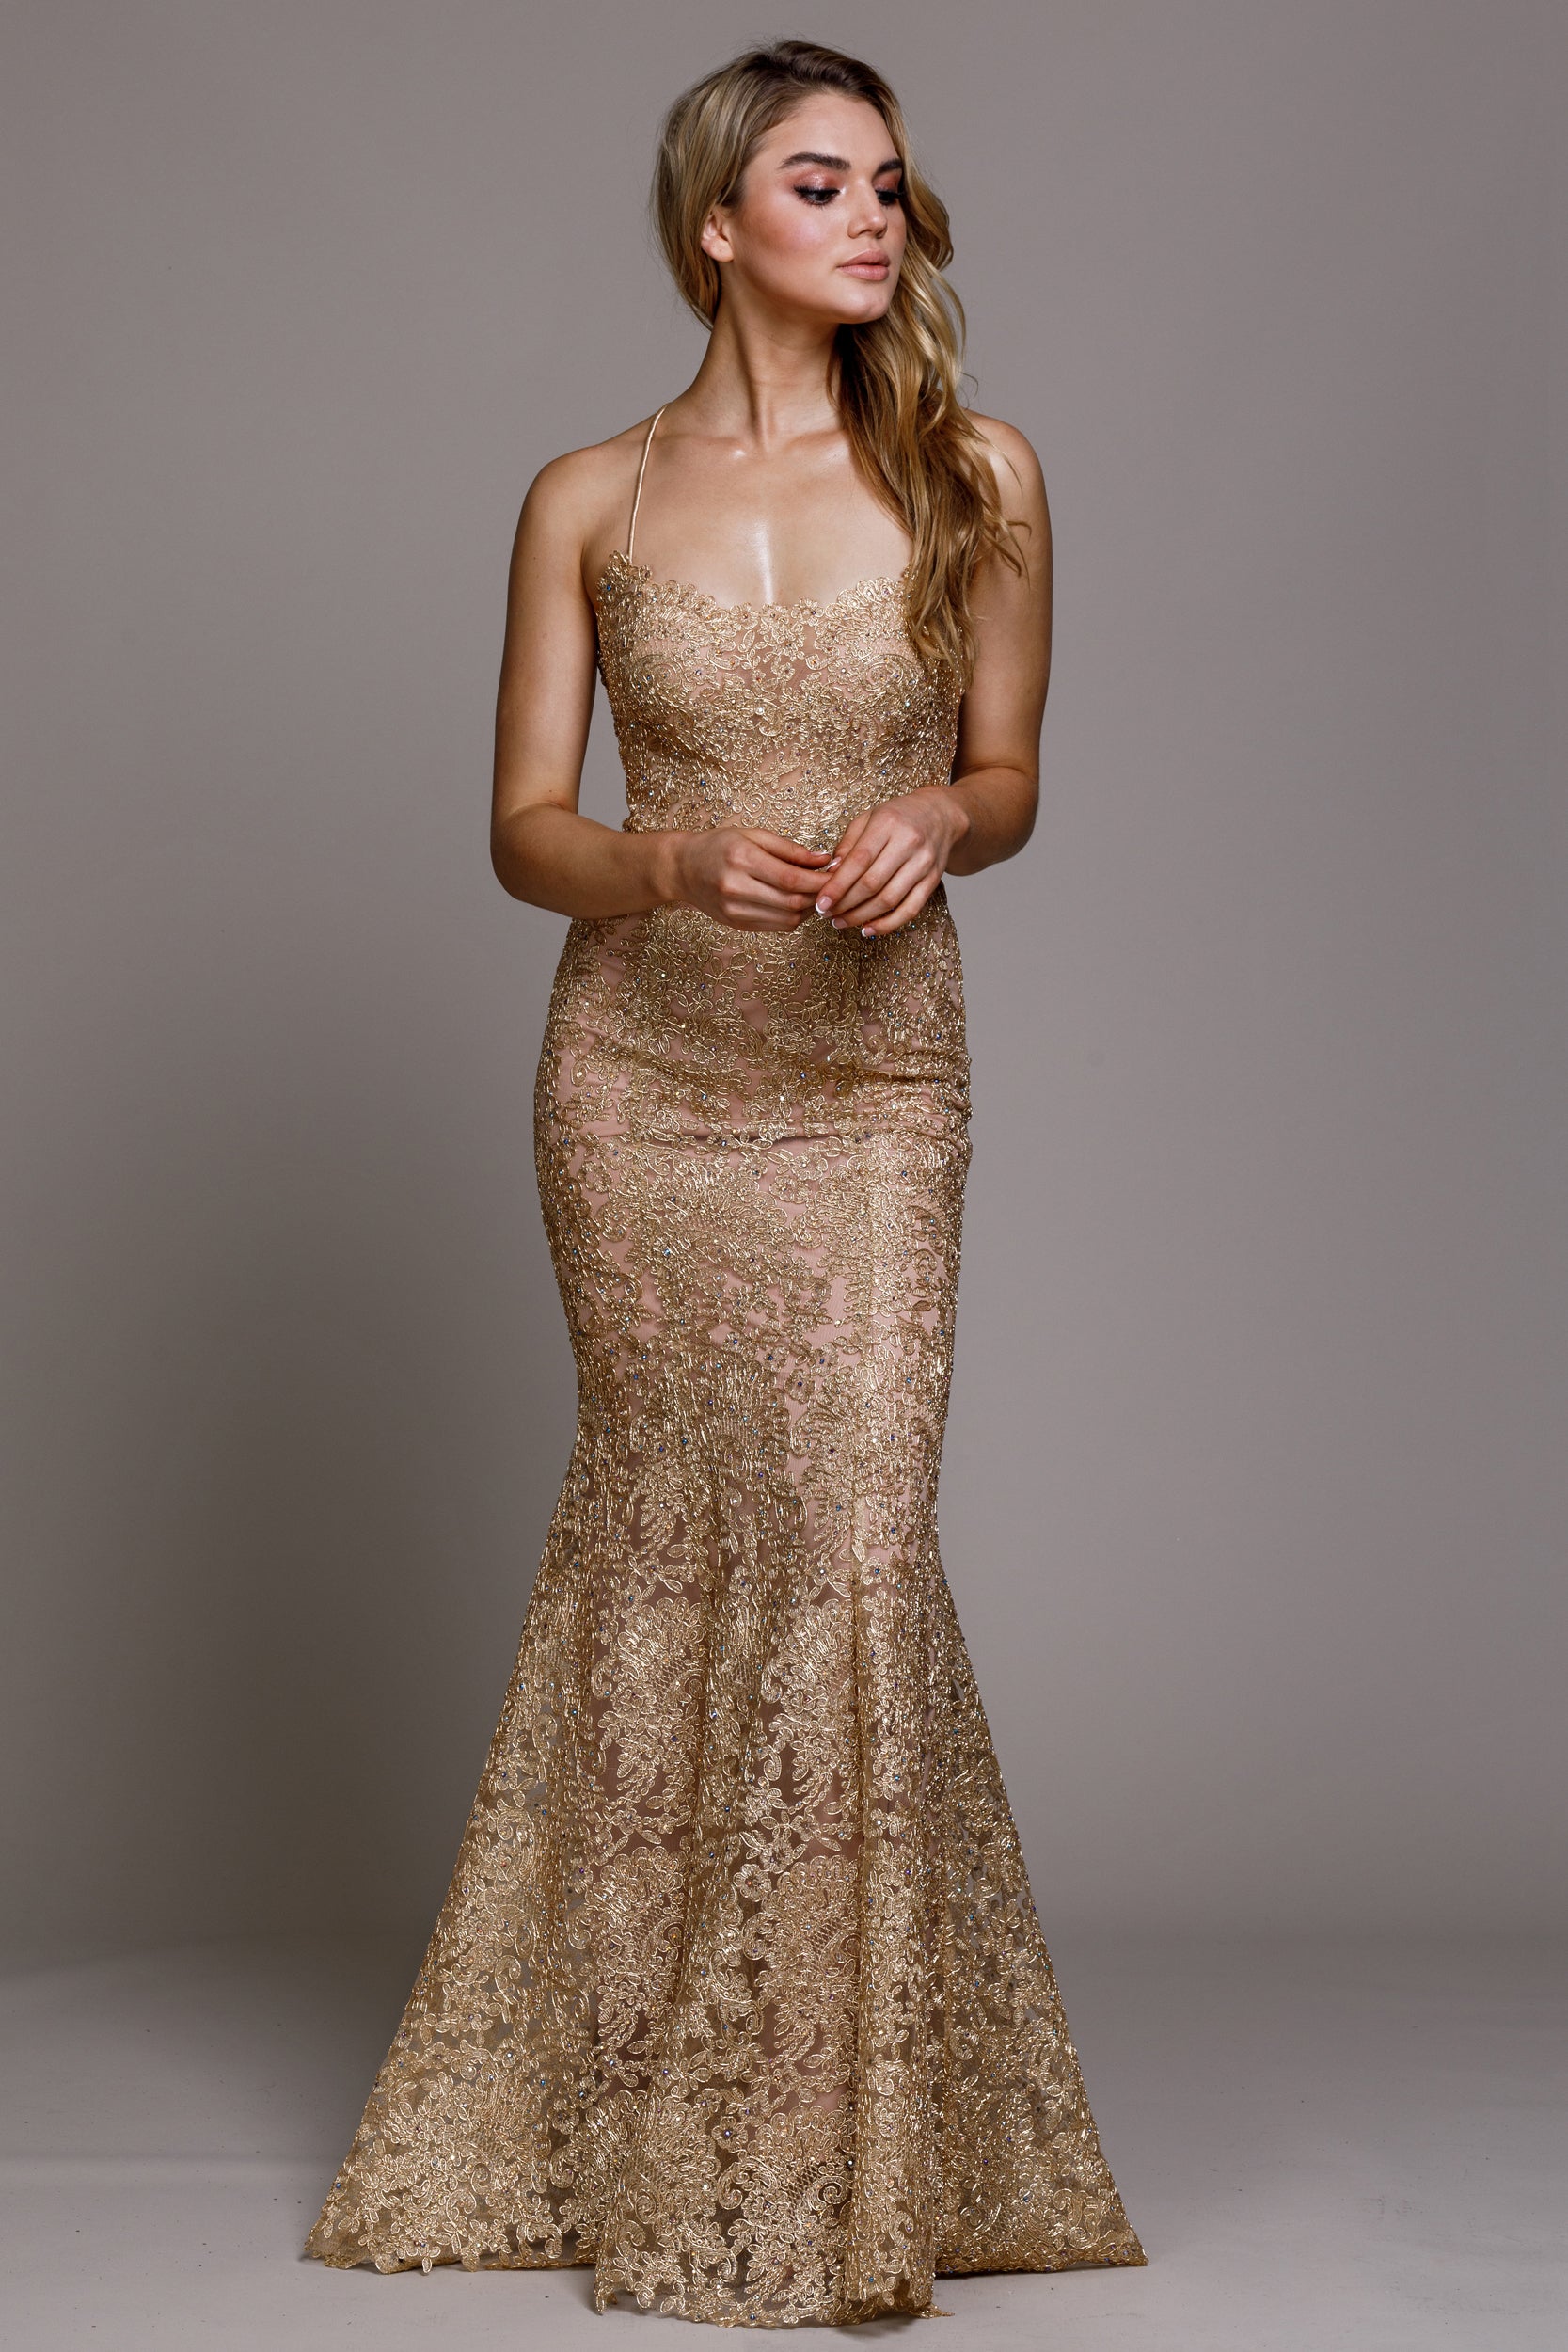 Main image of Embroidered Criss-cross Back Fitted Prom Gown